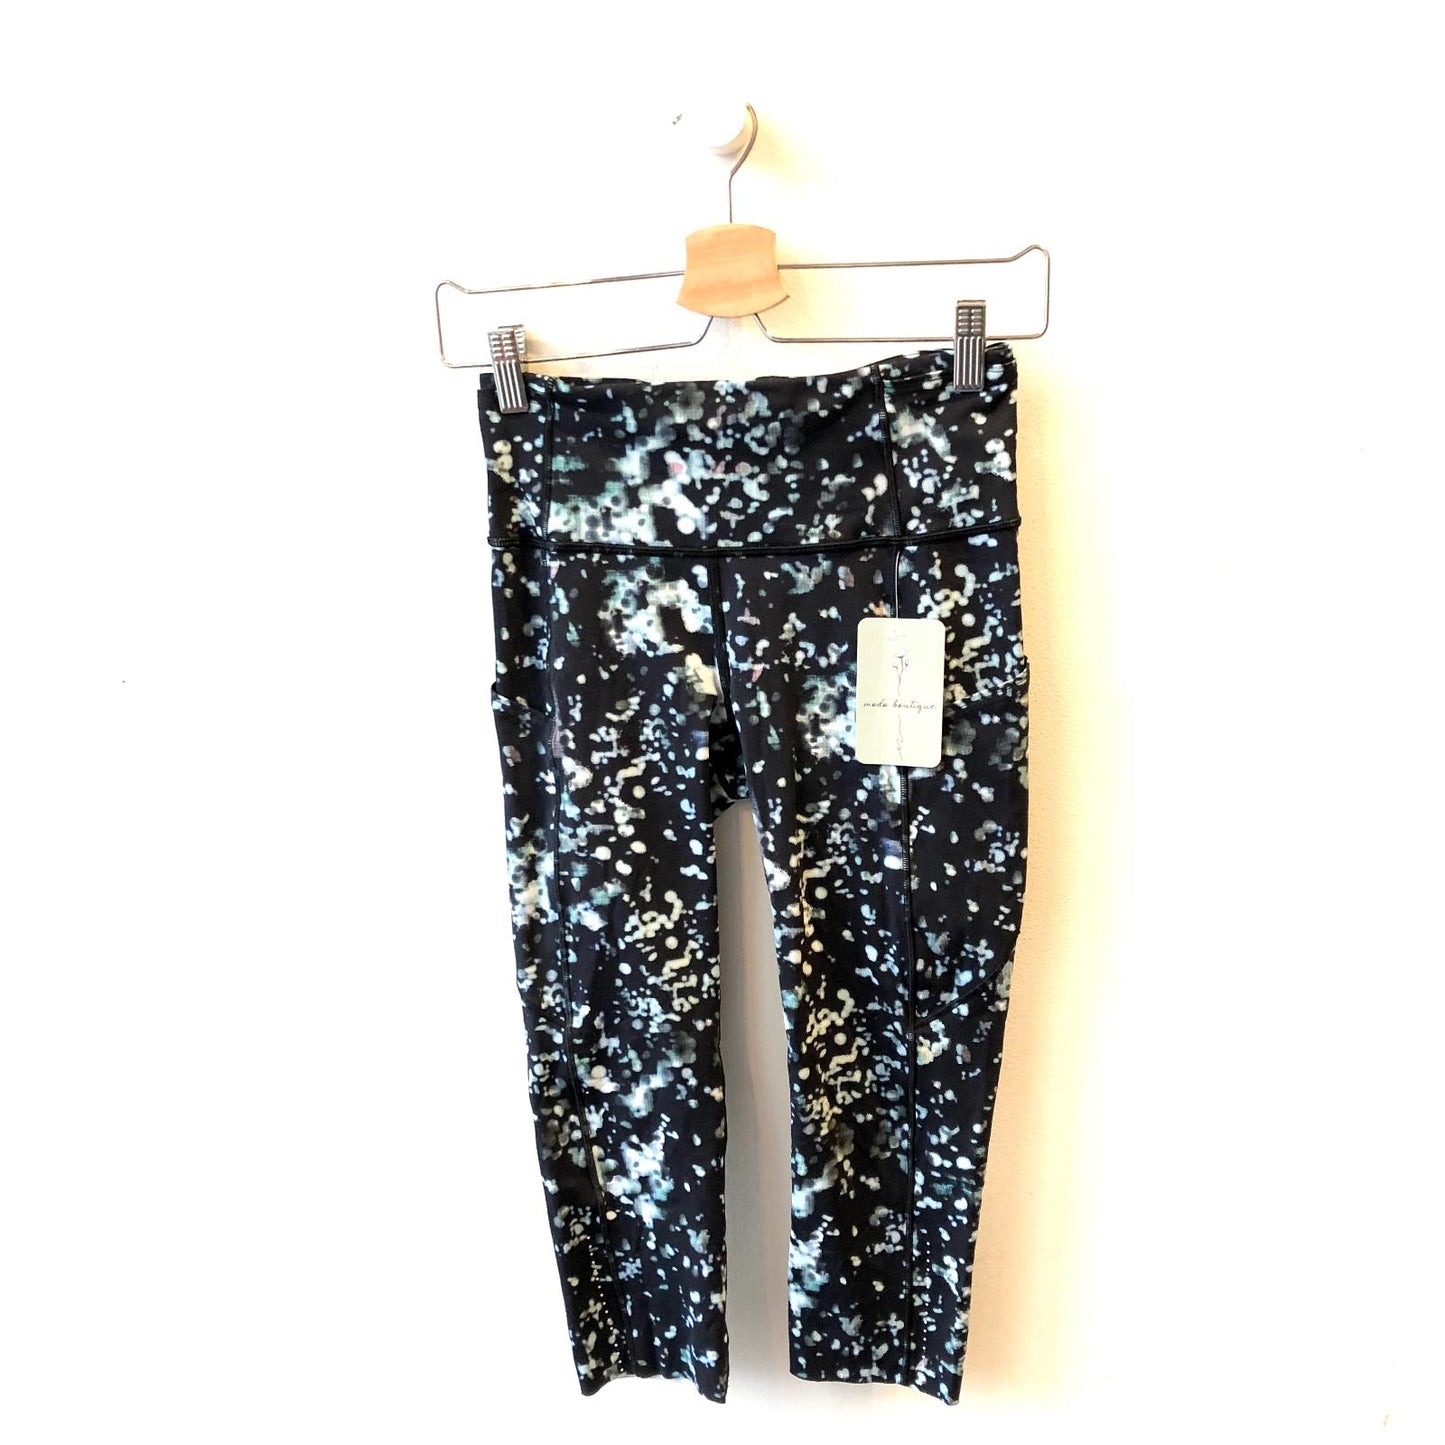 6 - Lululemon Black Speckled Patterned TWO PIECE Top & Pants Outfit Set 0614CF